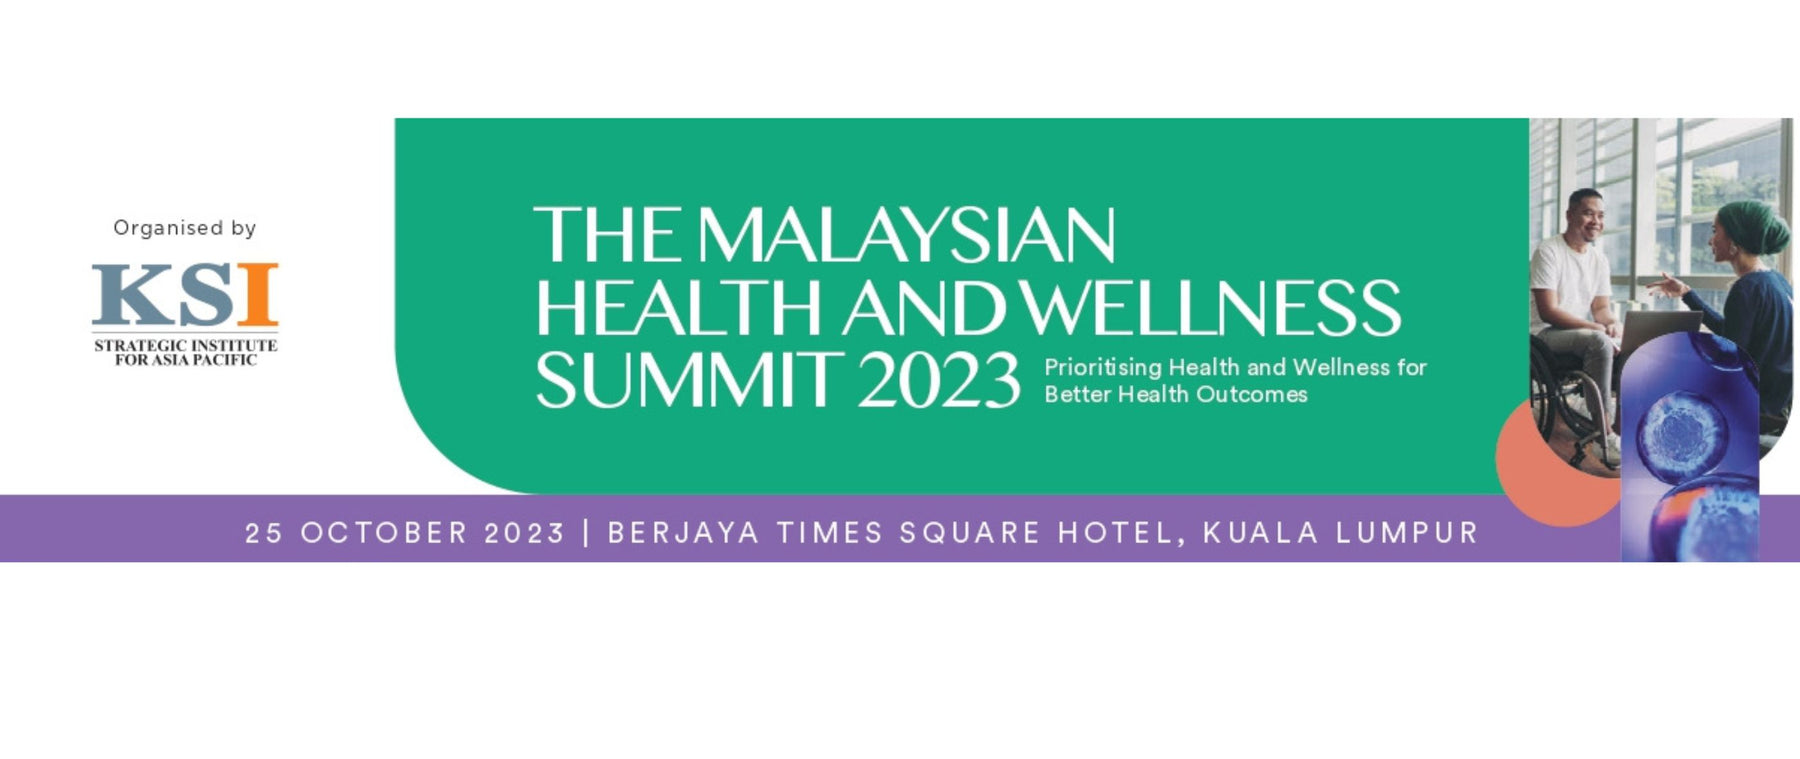 [October 2023 Event] KSI The Malaysian Health and Wellness Summit 2023 on 25 October 2023